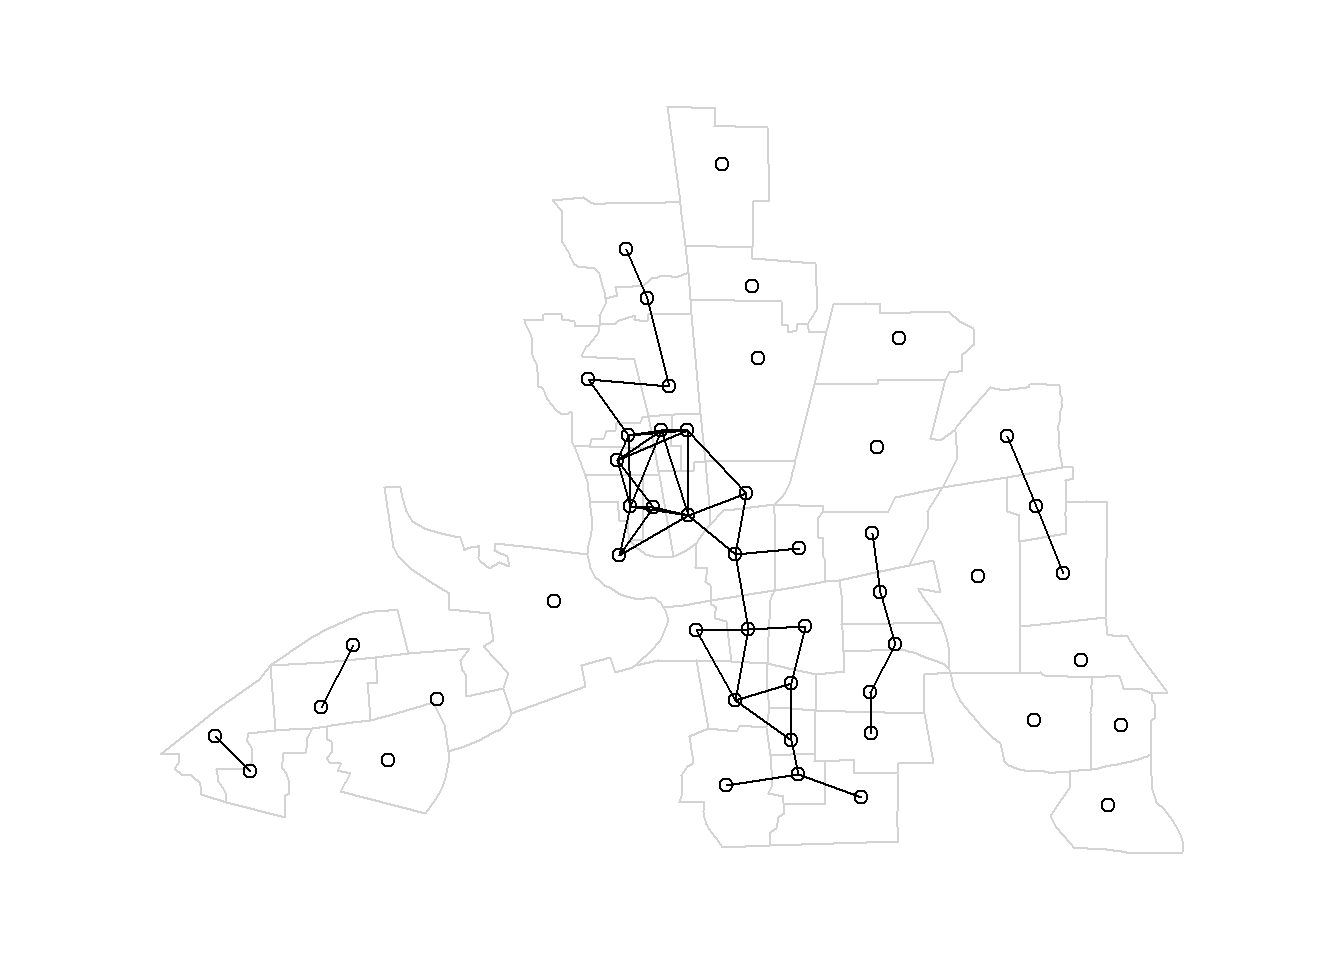 Left: Neighbors based on distance. Area of interest is represented in black and its neighbors in gray. Circle's center is the centroid of the area of interest, and circle's radius is the distance. Right: Map of neighbors separated by a distance less than 0.4.